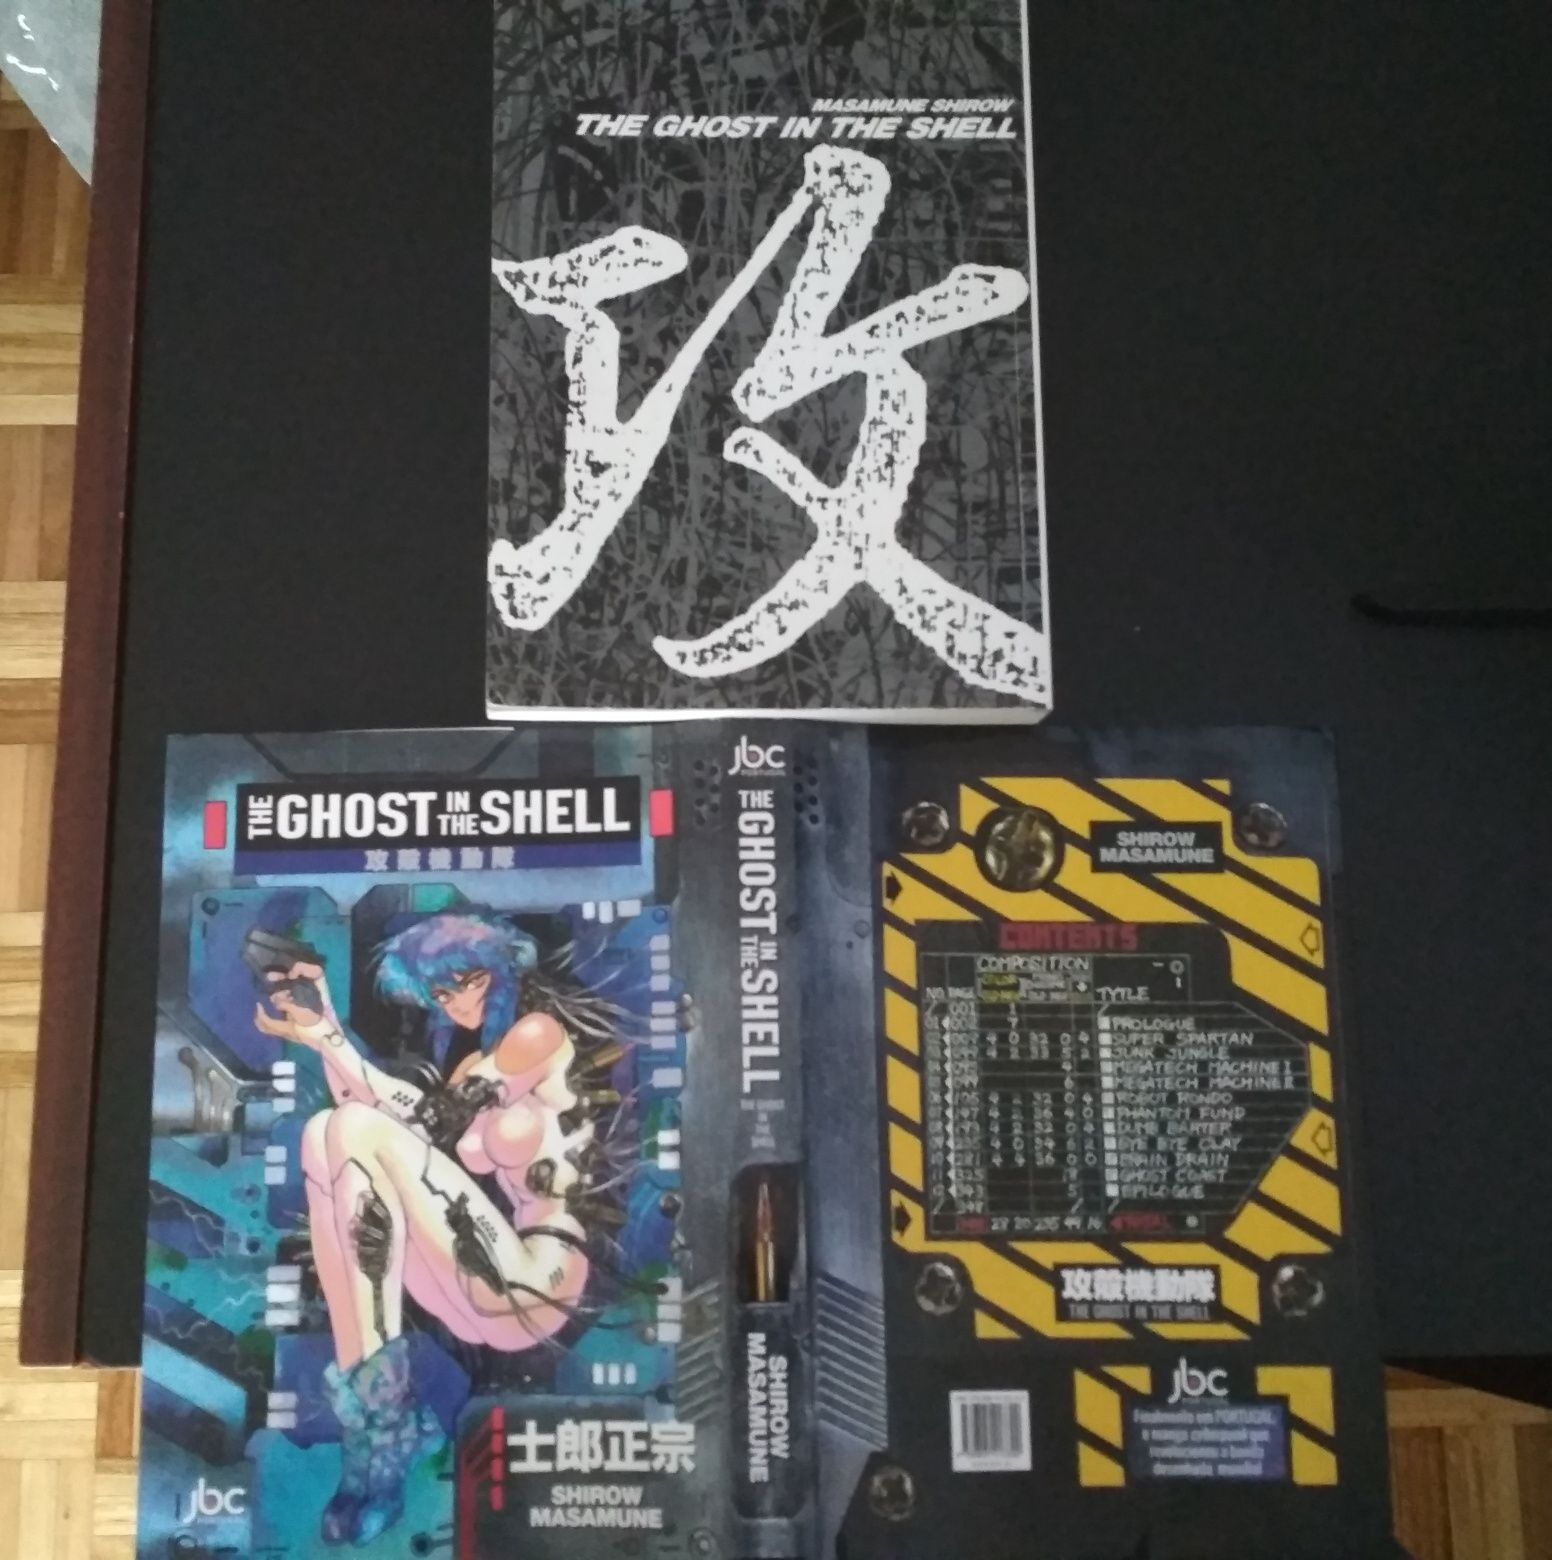 The Ghost In The Shell - JBC Portugal c/portes incluídos